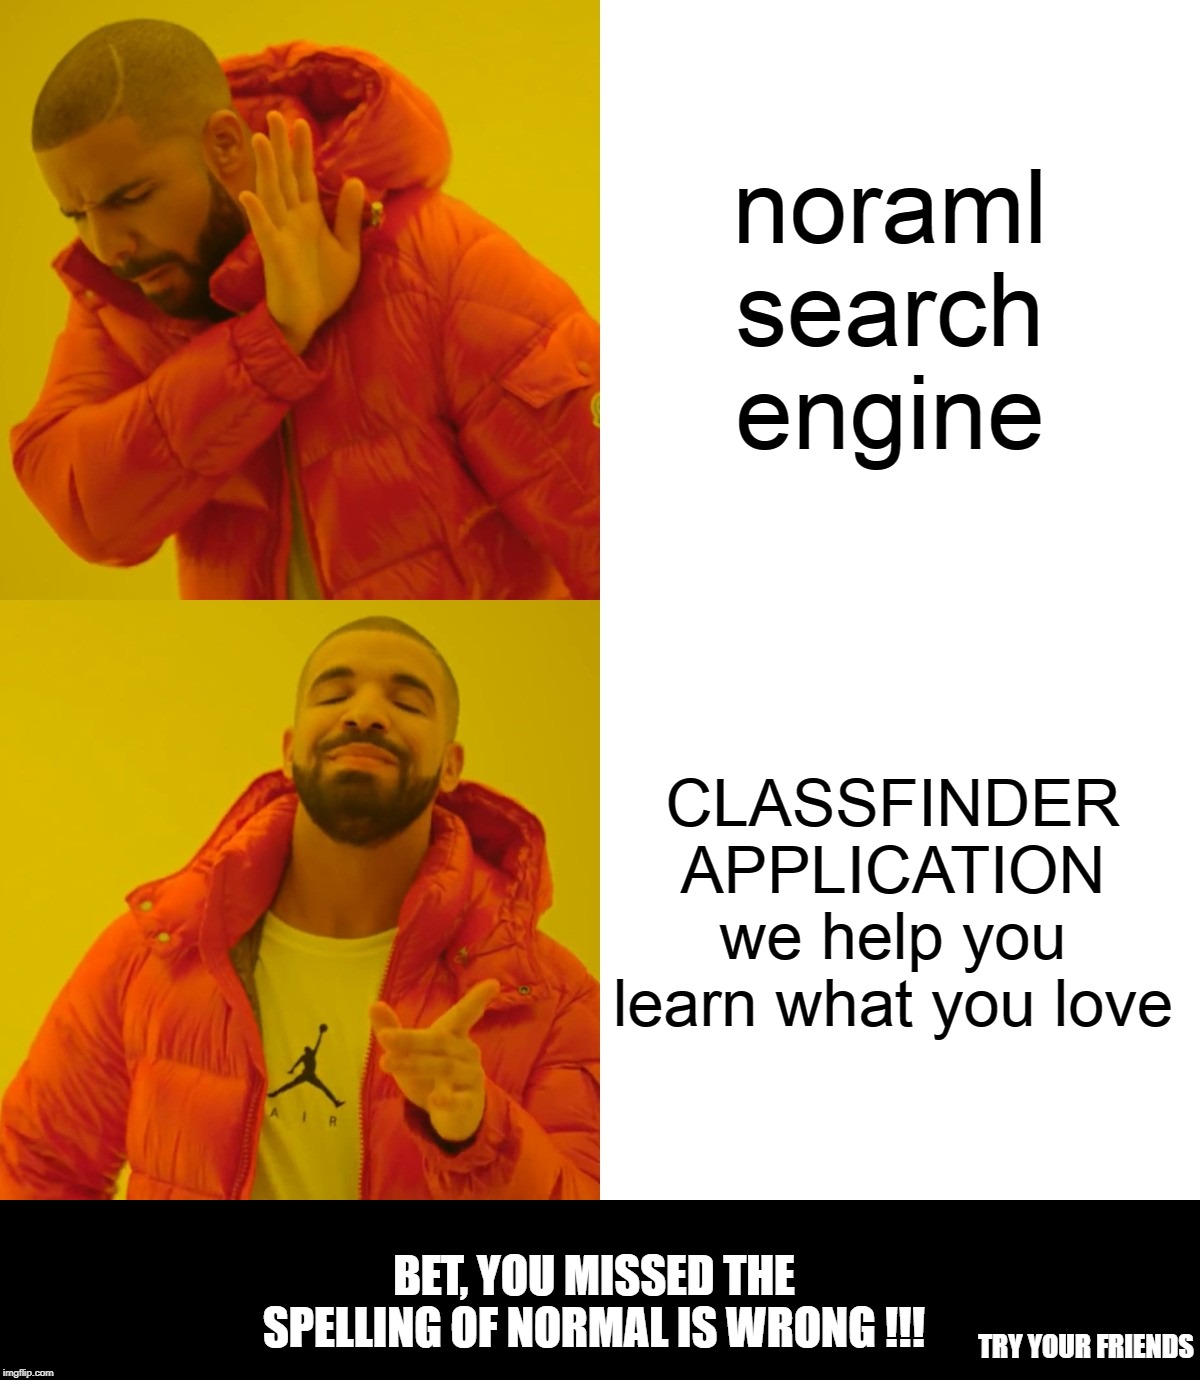 Drake Bling | noraml search engine; CLASSFINDER APPLICATION we help you learn what you love; BET, YOU MISSED THE SPELLING OF NORMAL IS WRONG !!! TRY YOUR FRIENDS | image tagged in memes,drake hotline bling,funny,illusions,optical illusion,logical | made w/ Imgflip meme maker